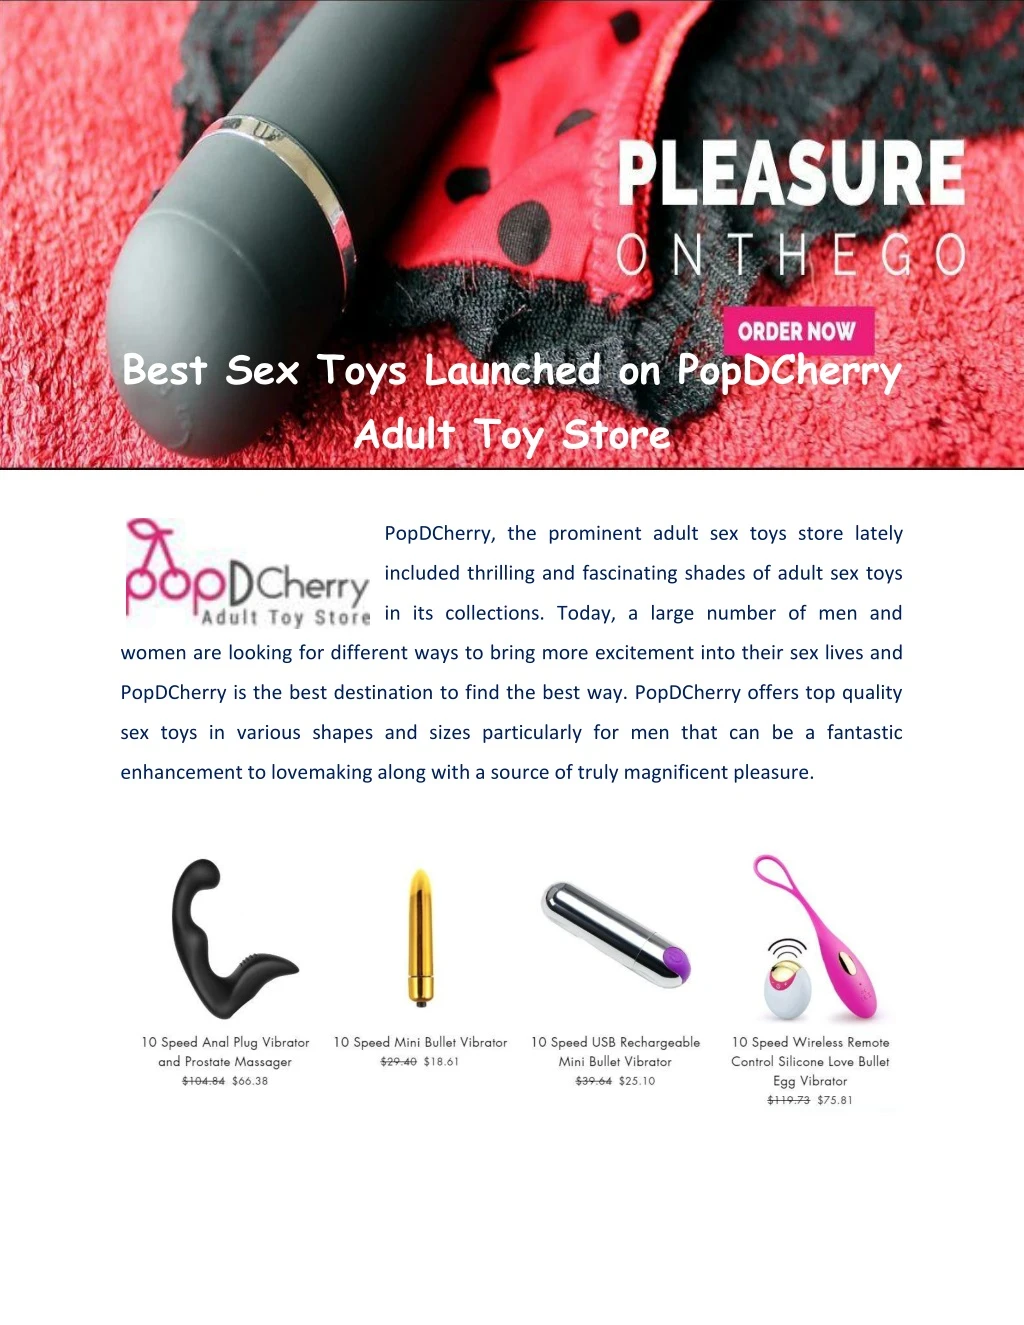 best sex toys launched on popdcherry adult